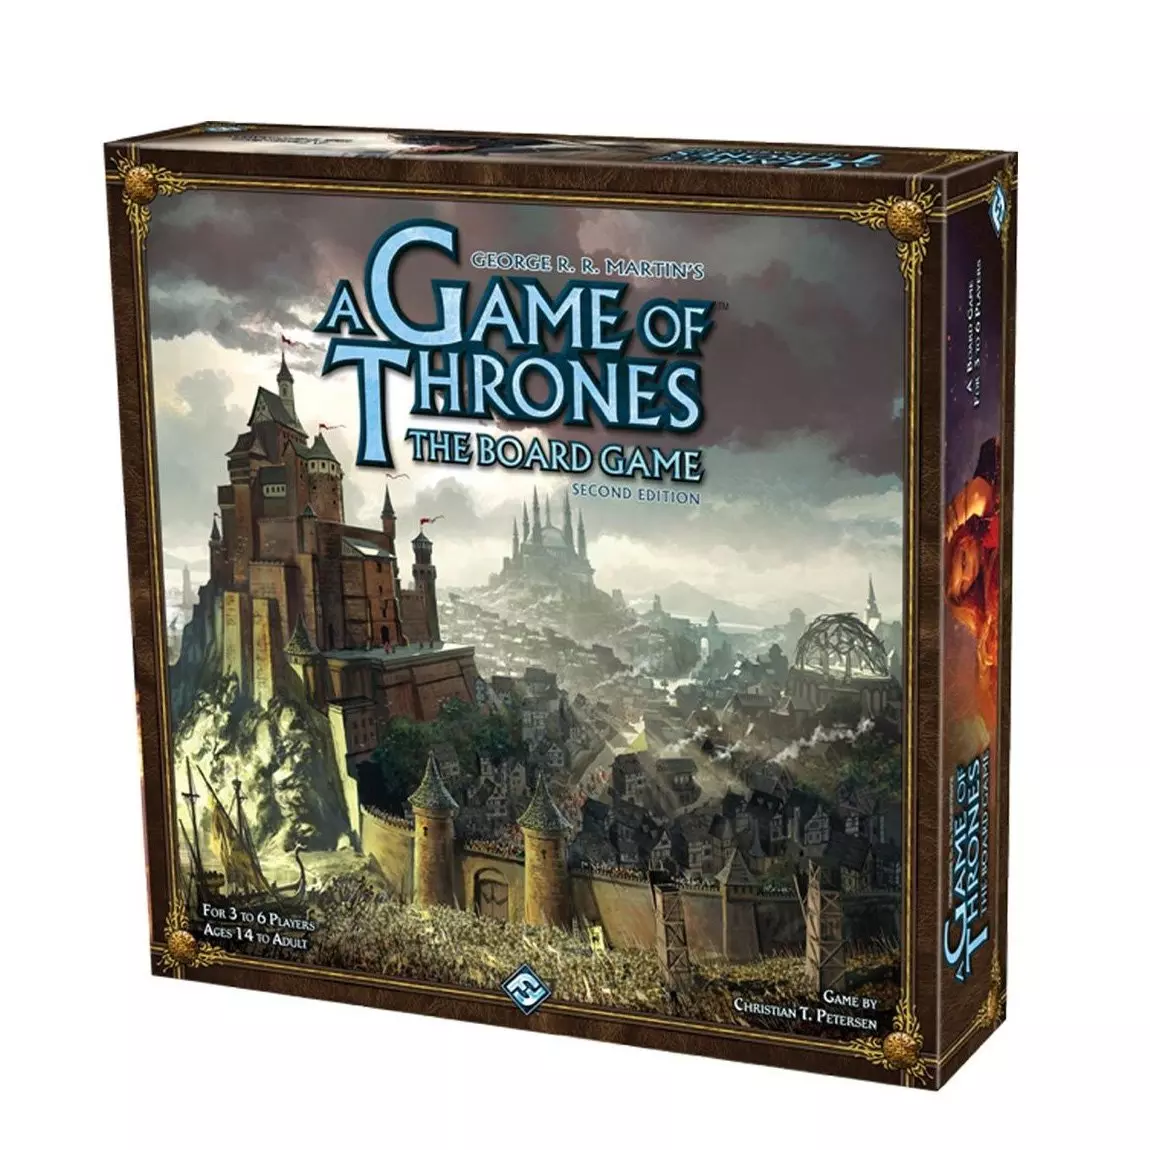 A Game Of Thrones Board Game